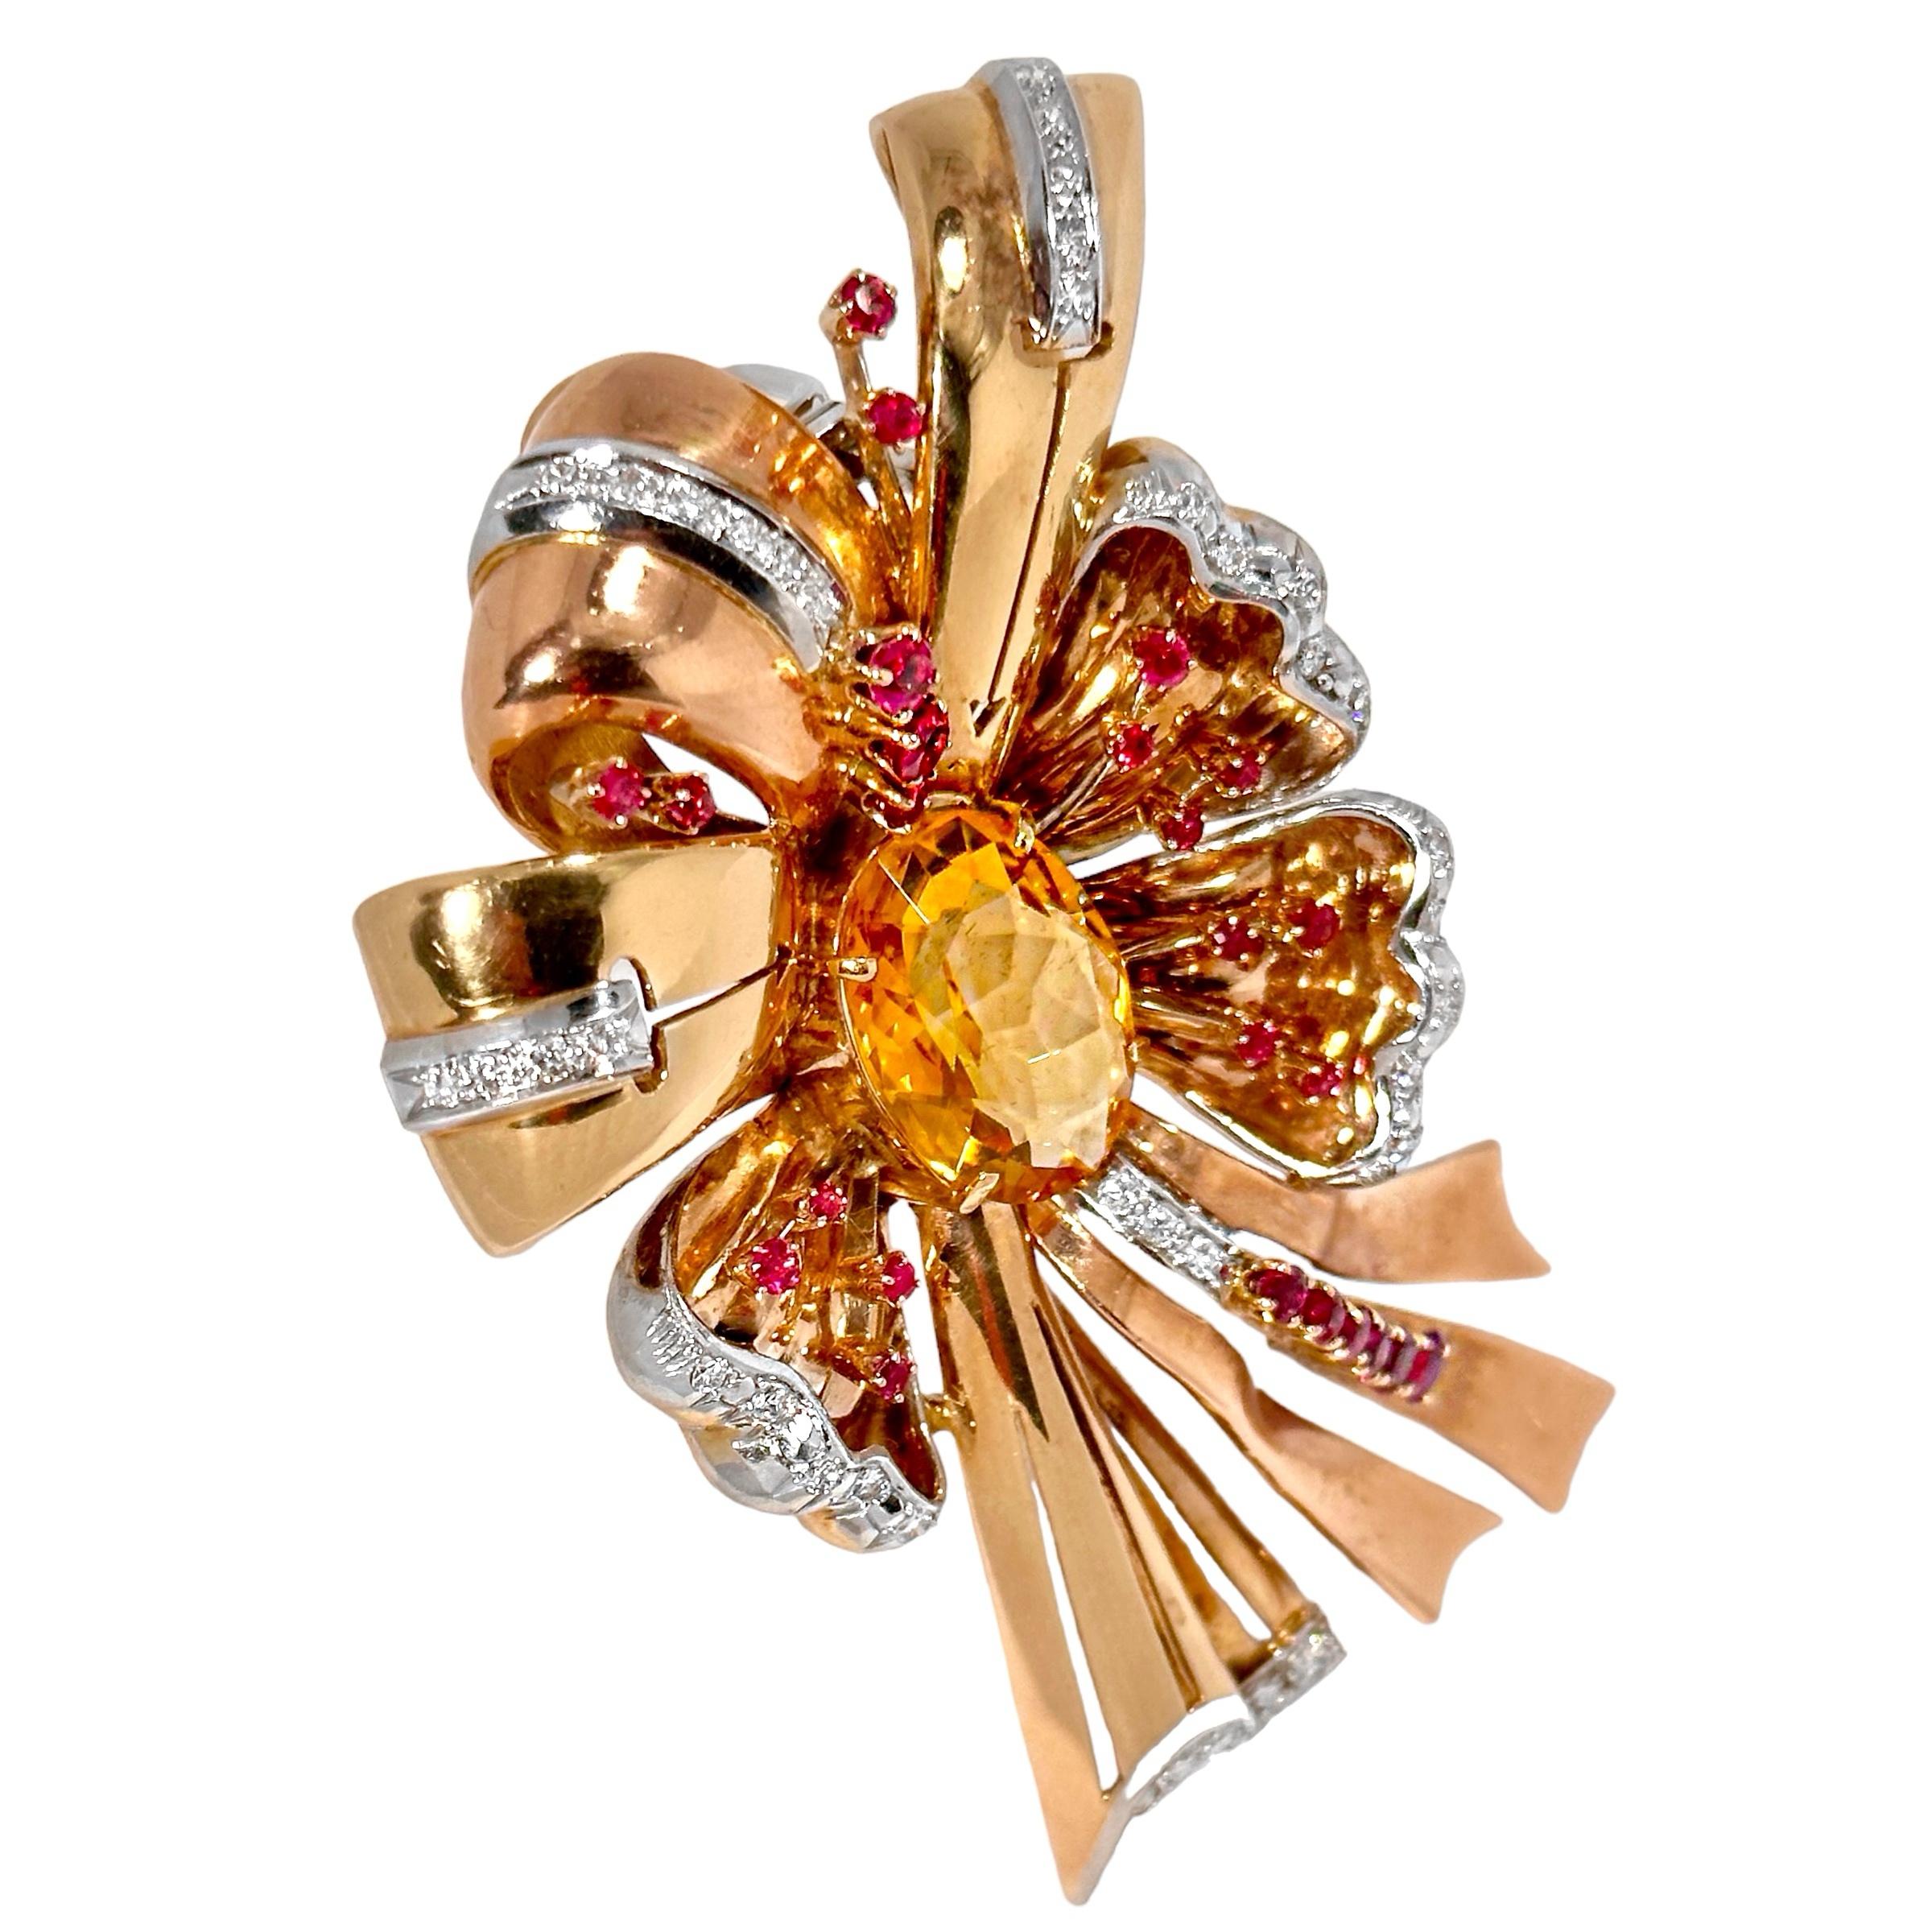 Big and Bold, Pink Gold, Diamond, Ruby and Citrine, Retro Brooch 3.5 Inches Long 2